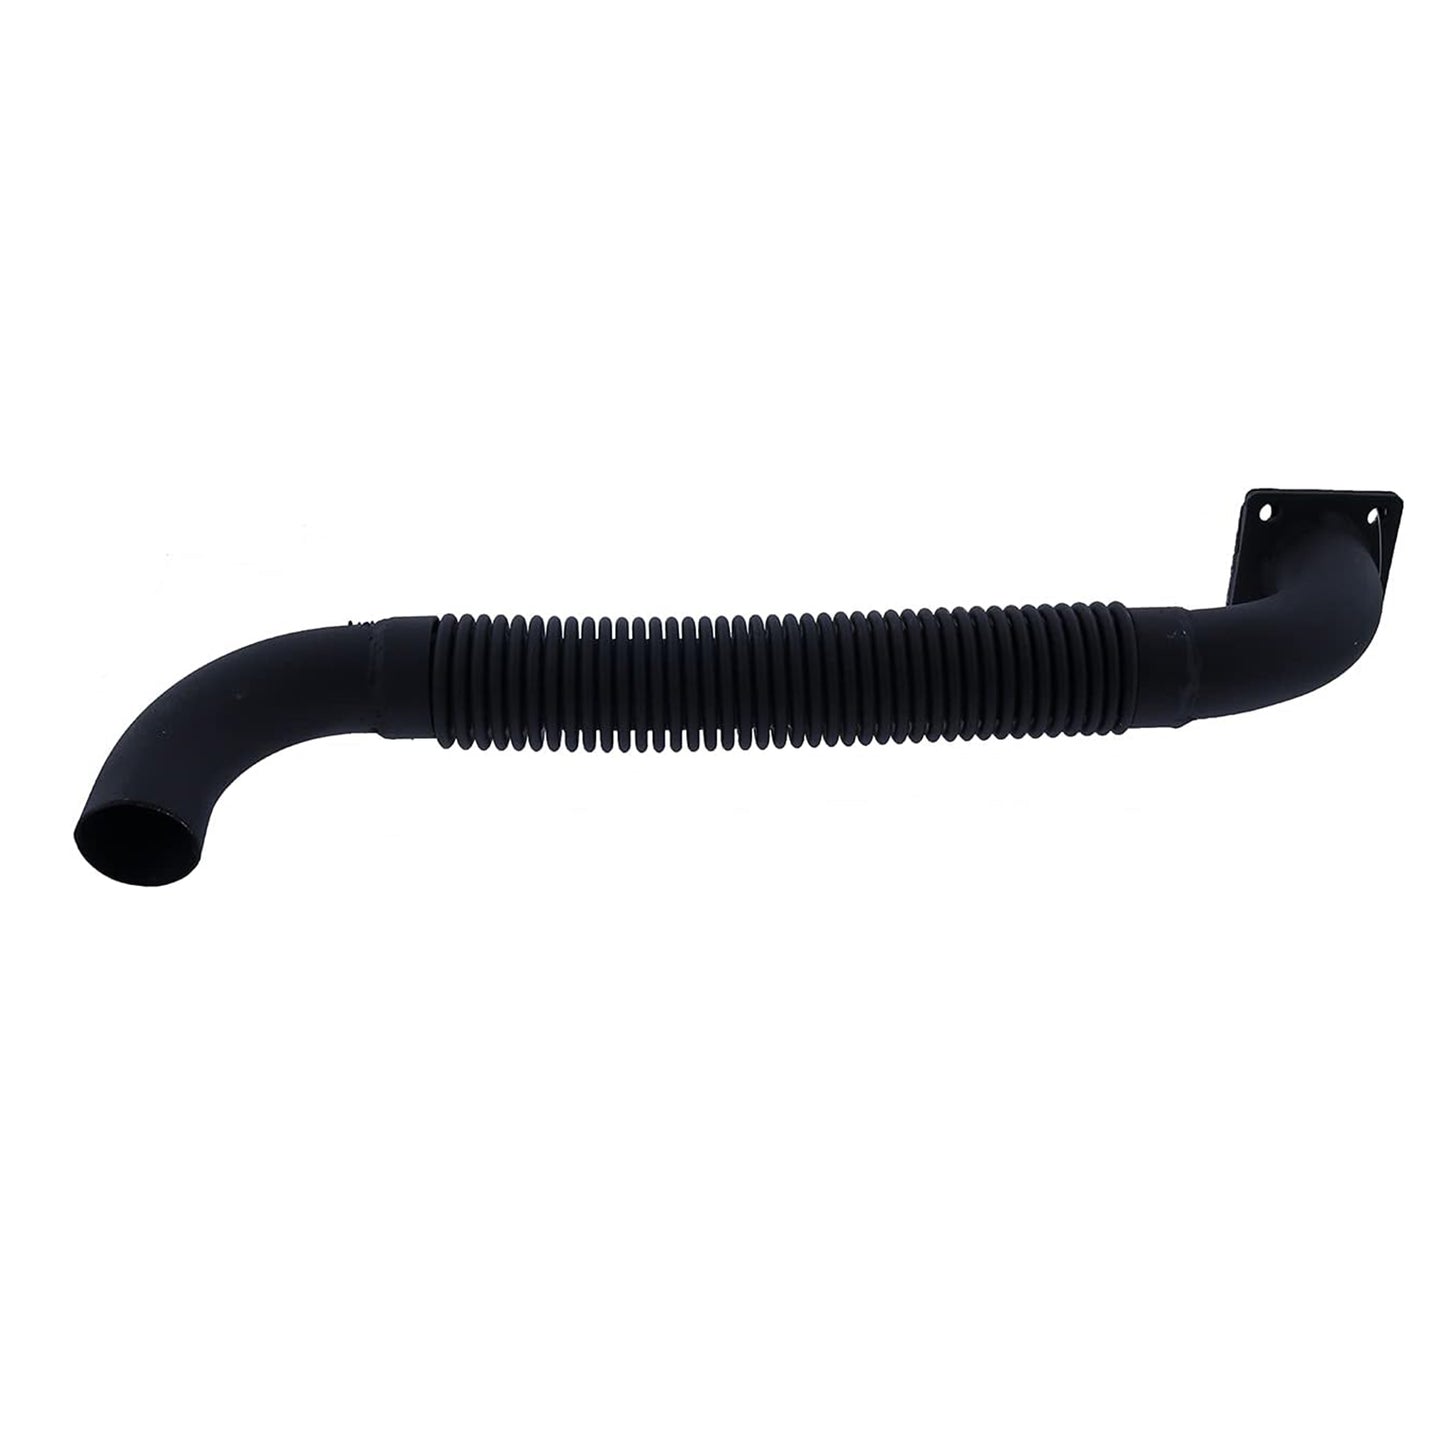 6569624 Exhaust Muffler Pipe Compatible with Bobcat Skid Steer Loader 643 645 743 1600